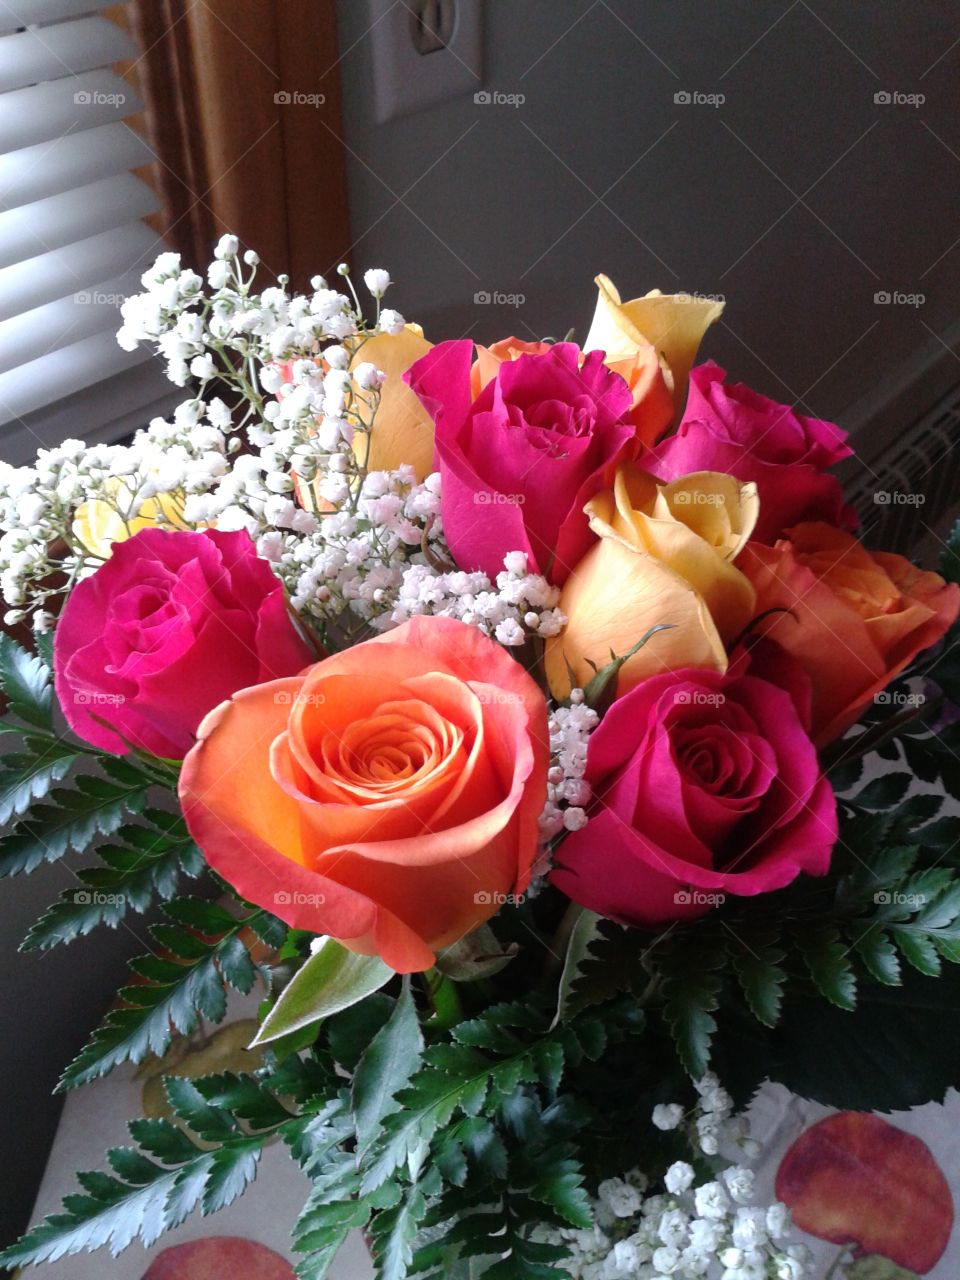 Roses for me.  a simple but attractive gathering of color